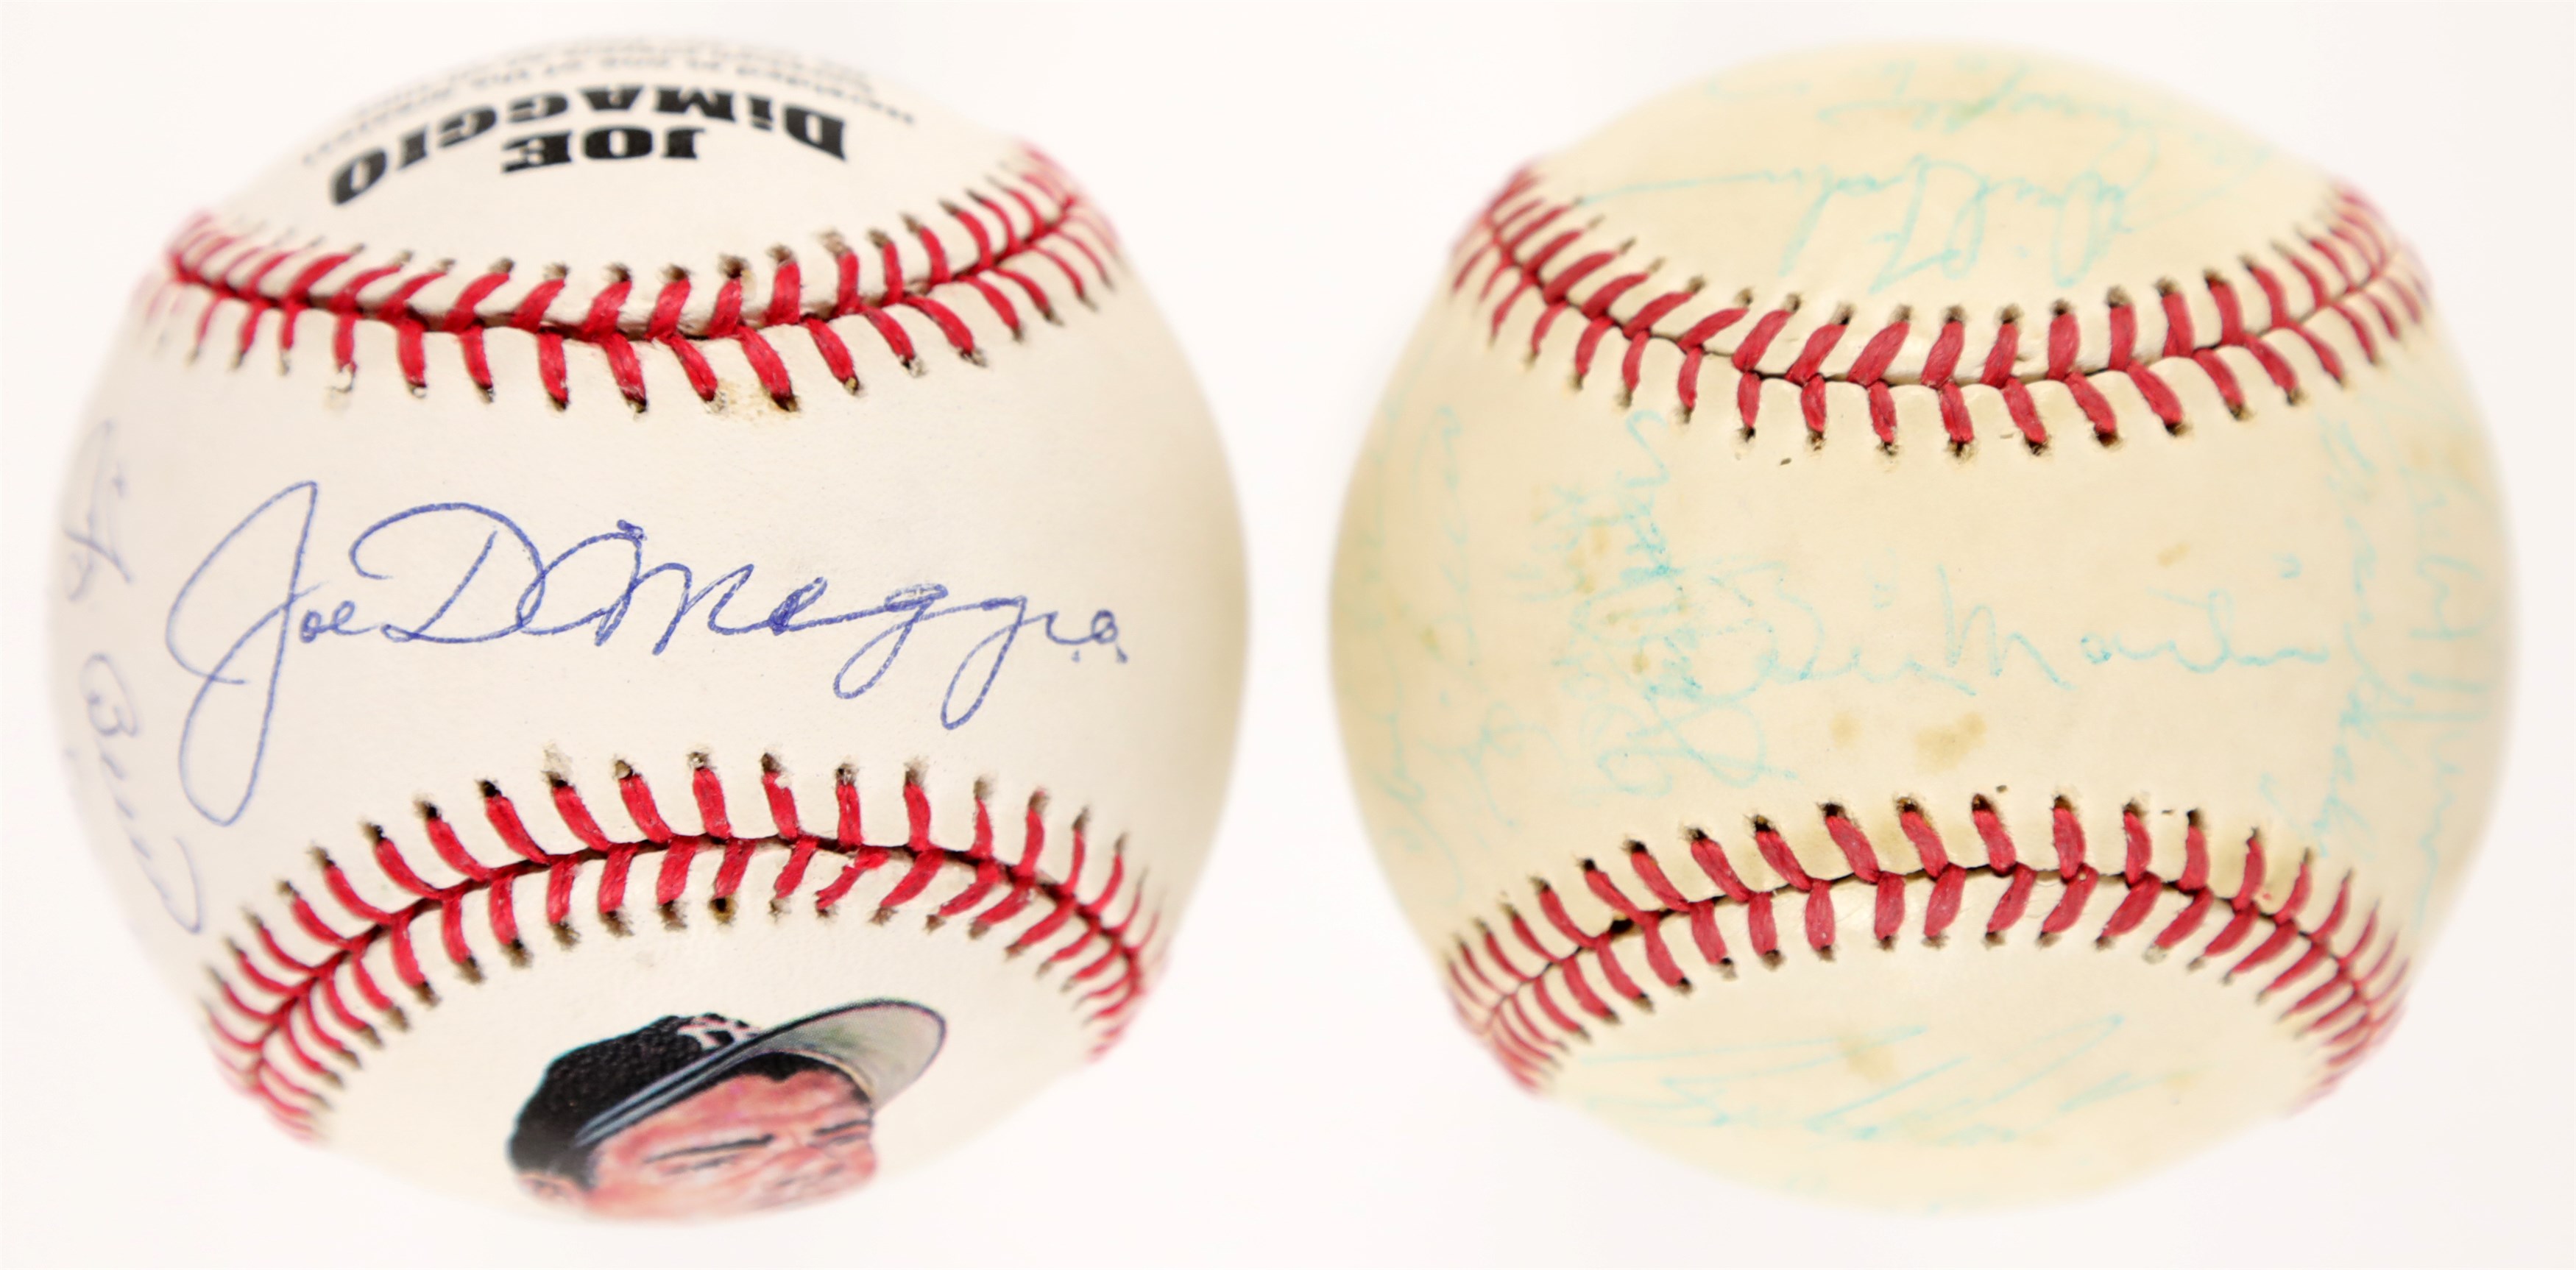 1977 WS Champion NY Yankees Team Signed Ball and Joe DiMaggio Signed Stat Ball